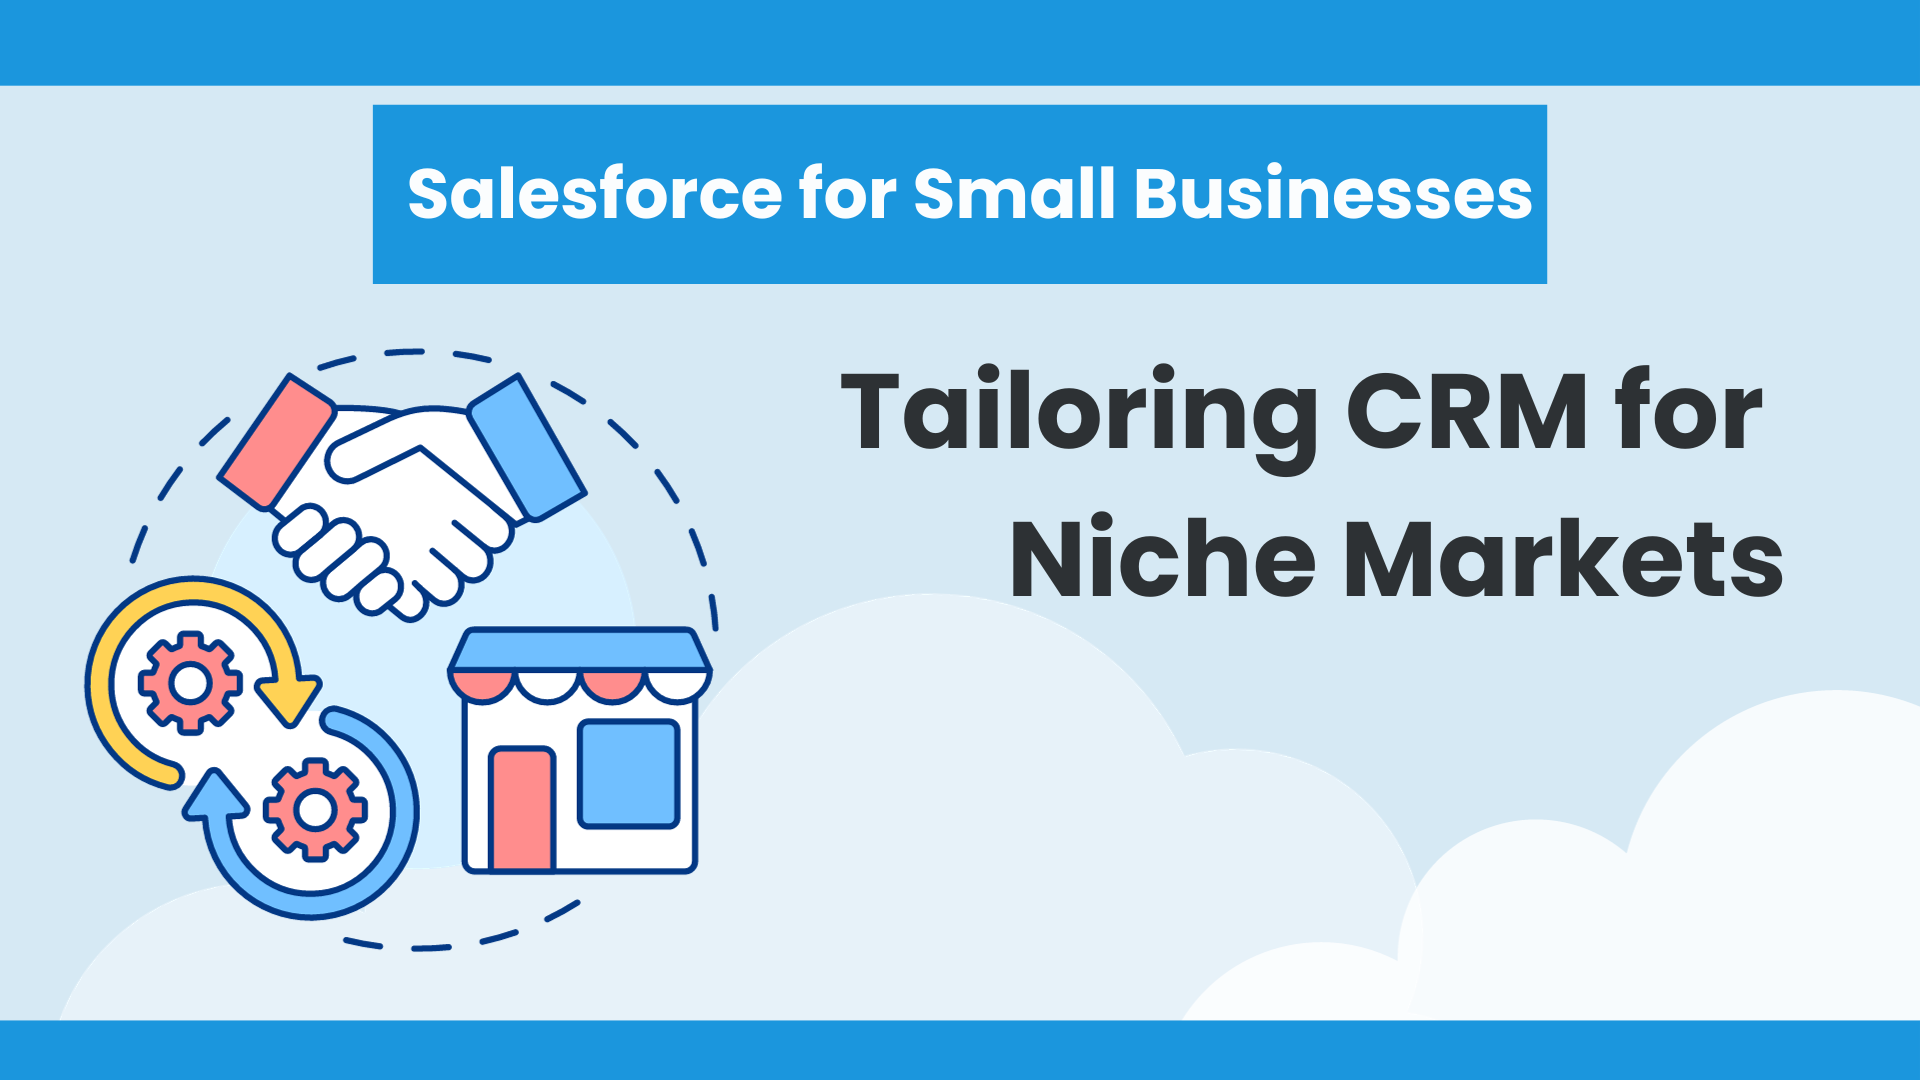 Salesforce for Small Businesses: Tailoring CRM for Niche Markets